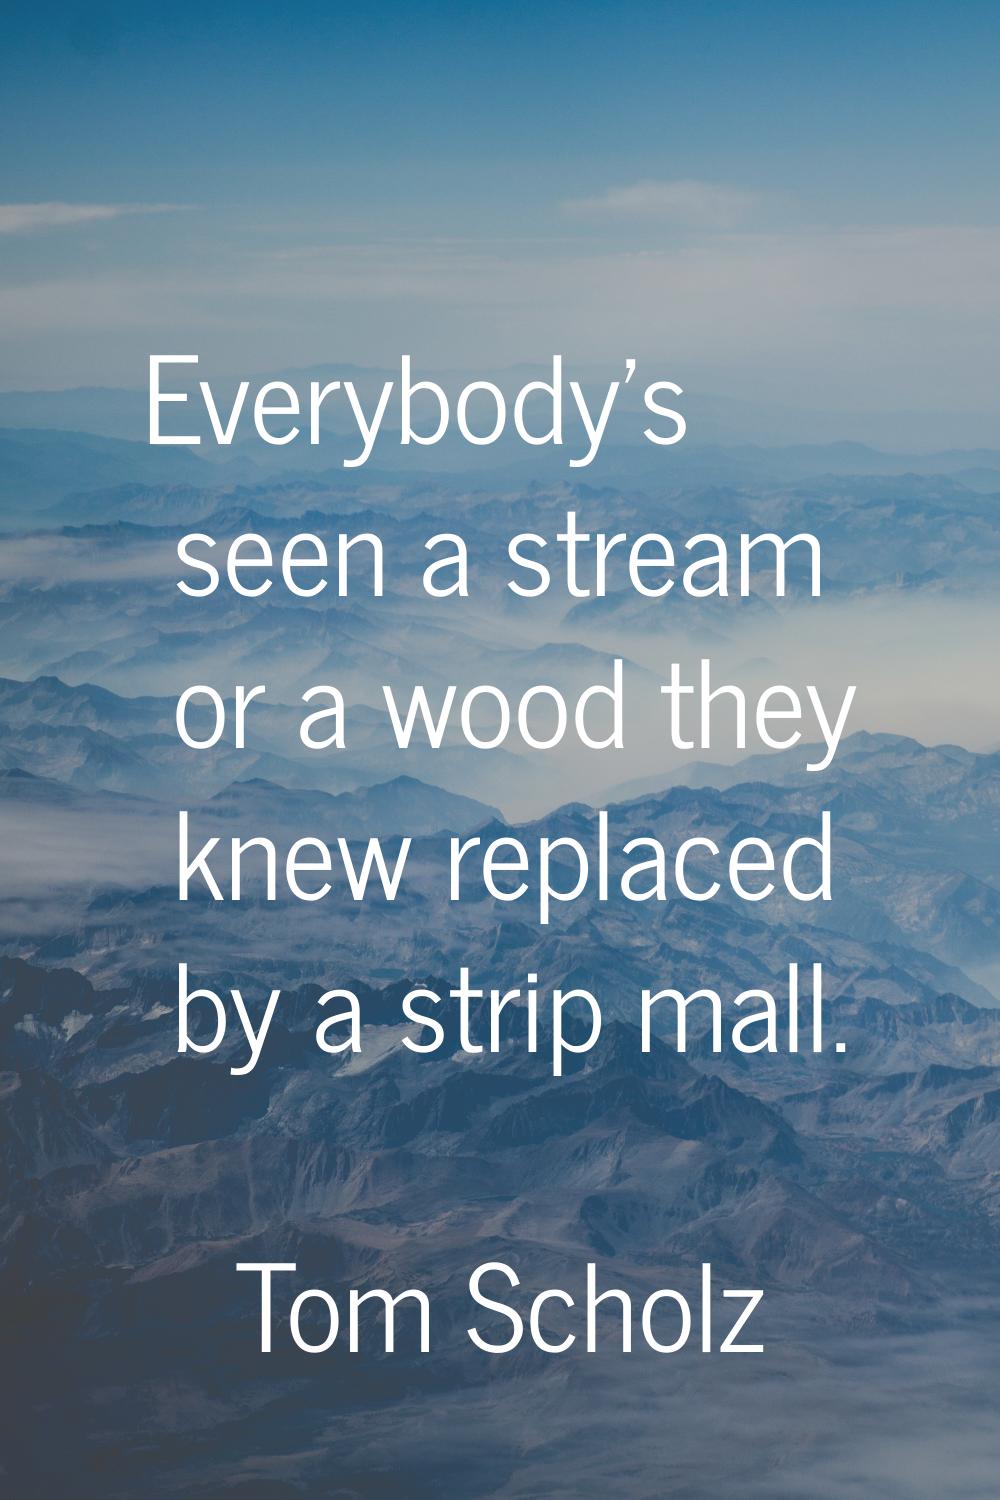 Everybody's seen a stream or a wood they knew replaced by a strip mall.